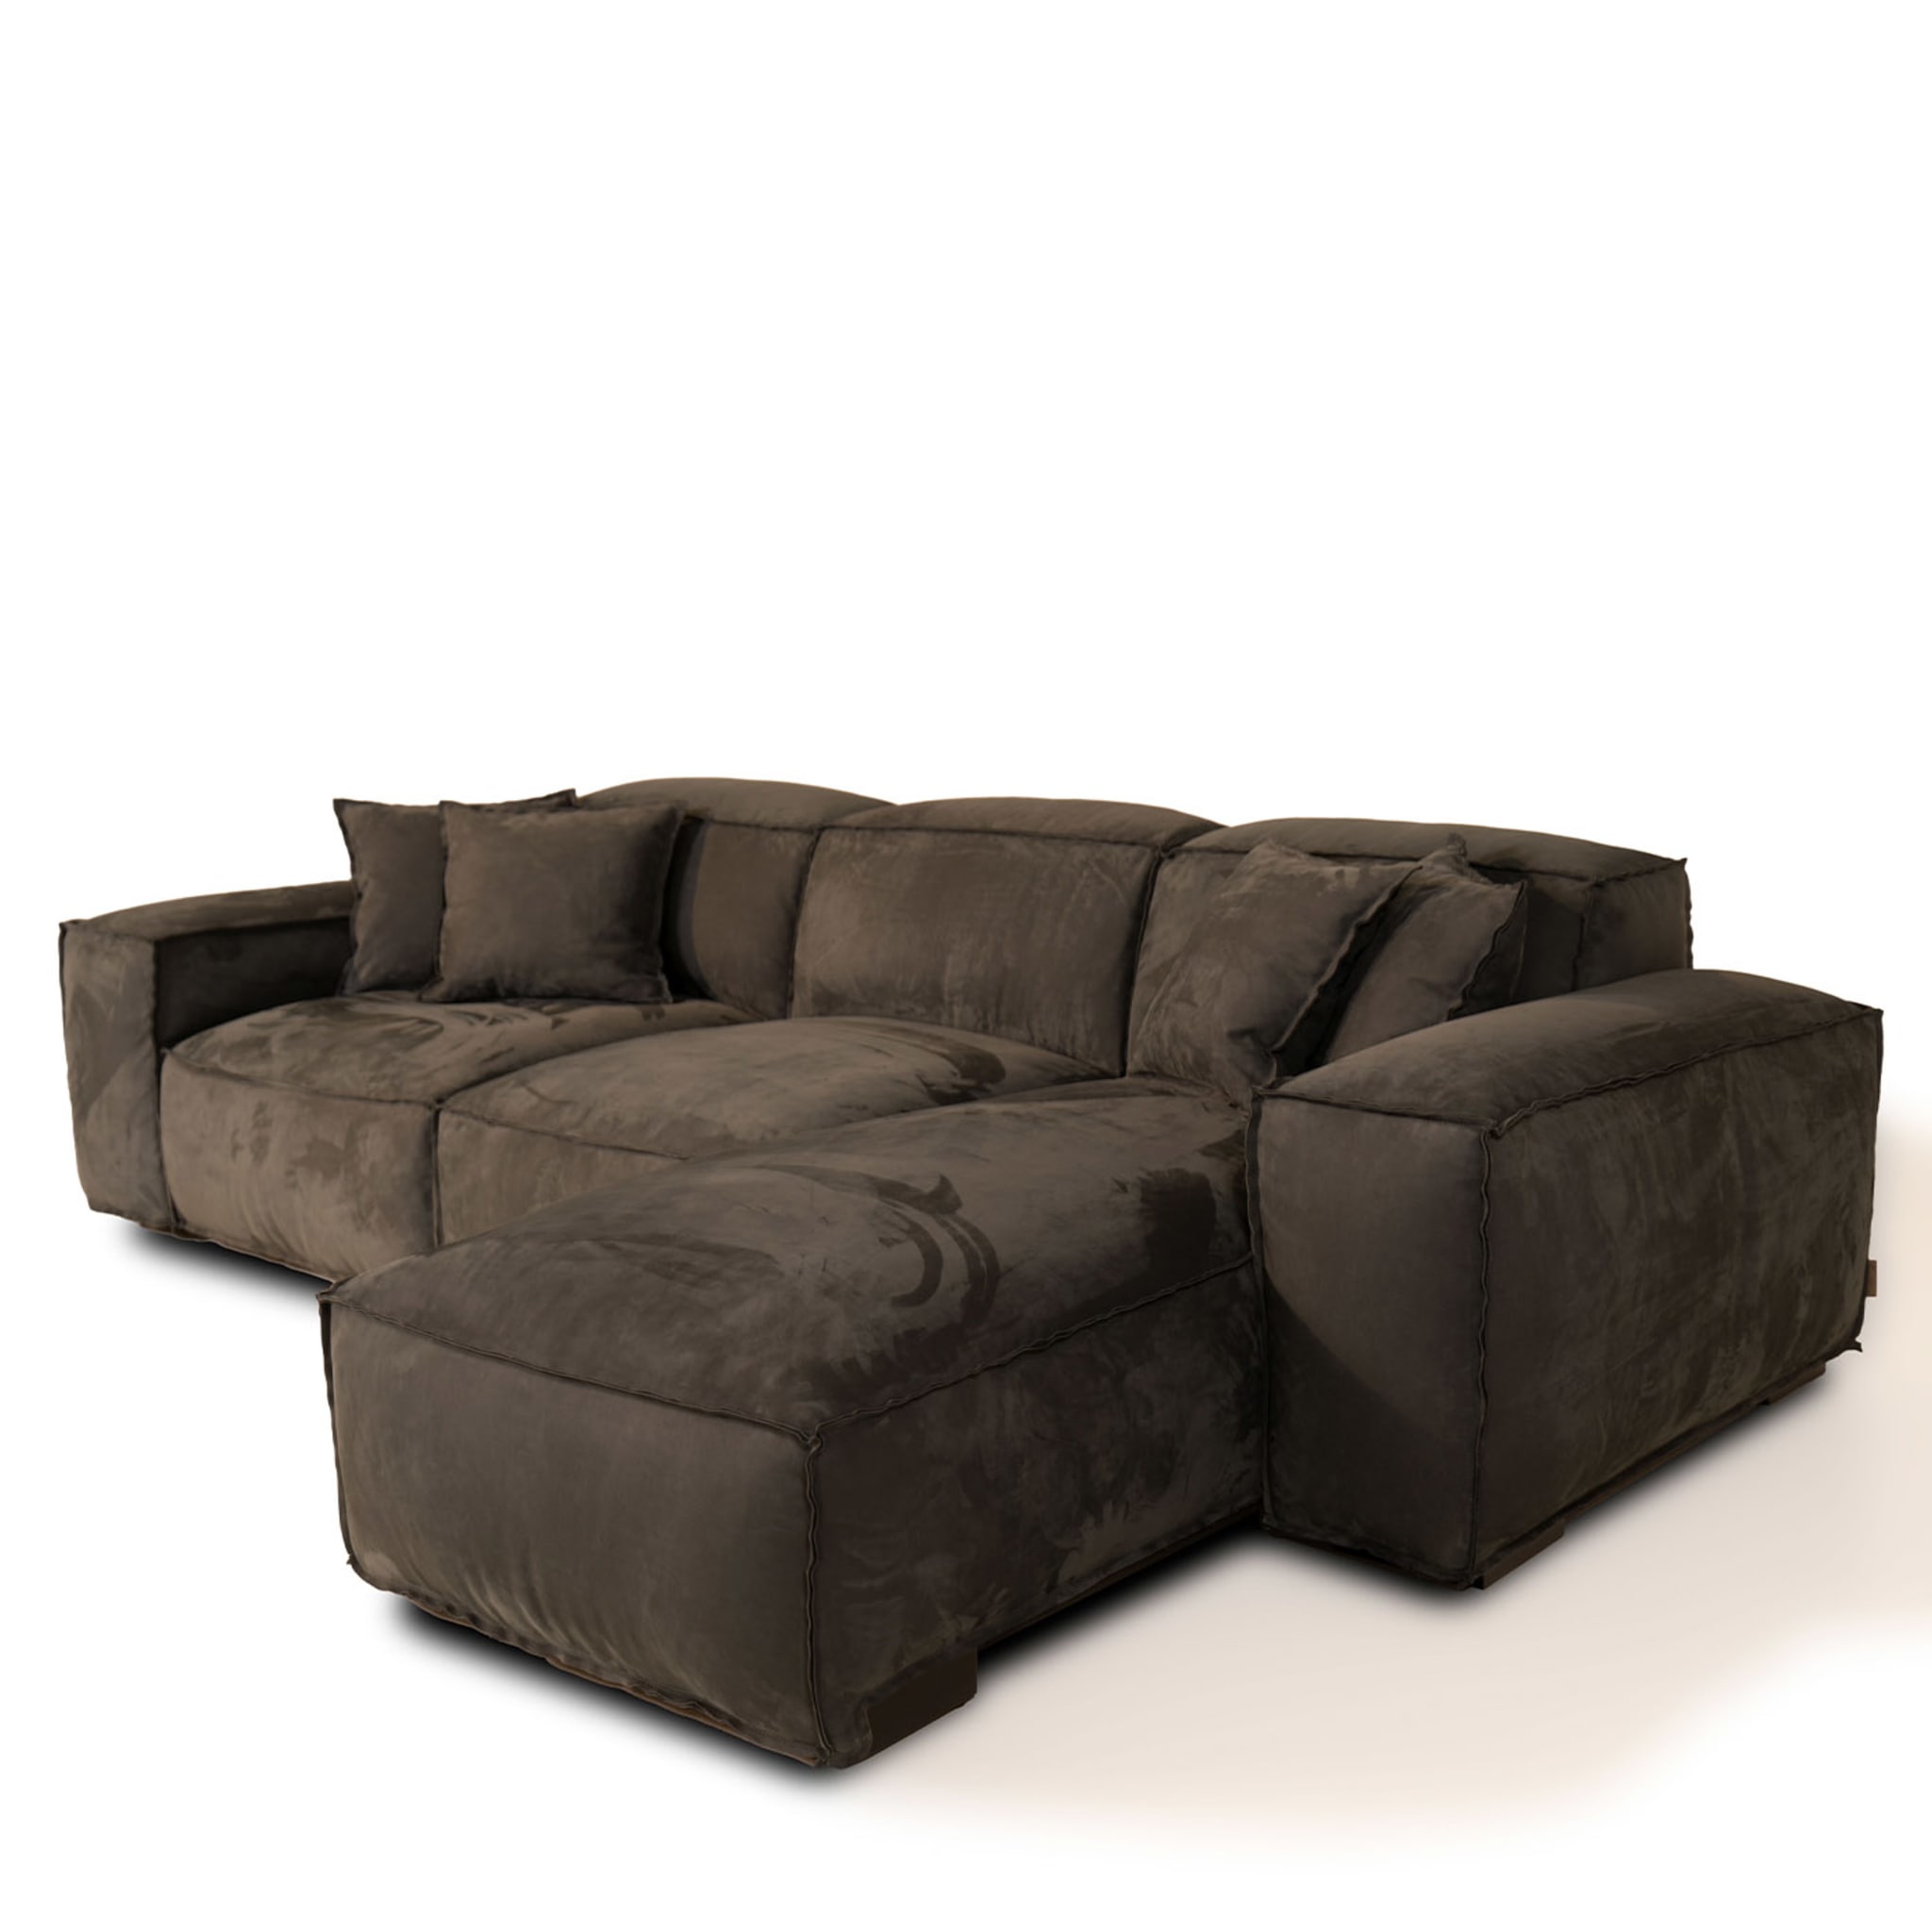 Placido Sofa with Chaise Longue by Marco and Giulio Mantellassi - Alternative view 2